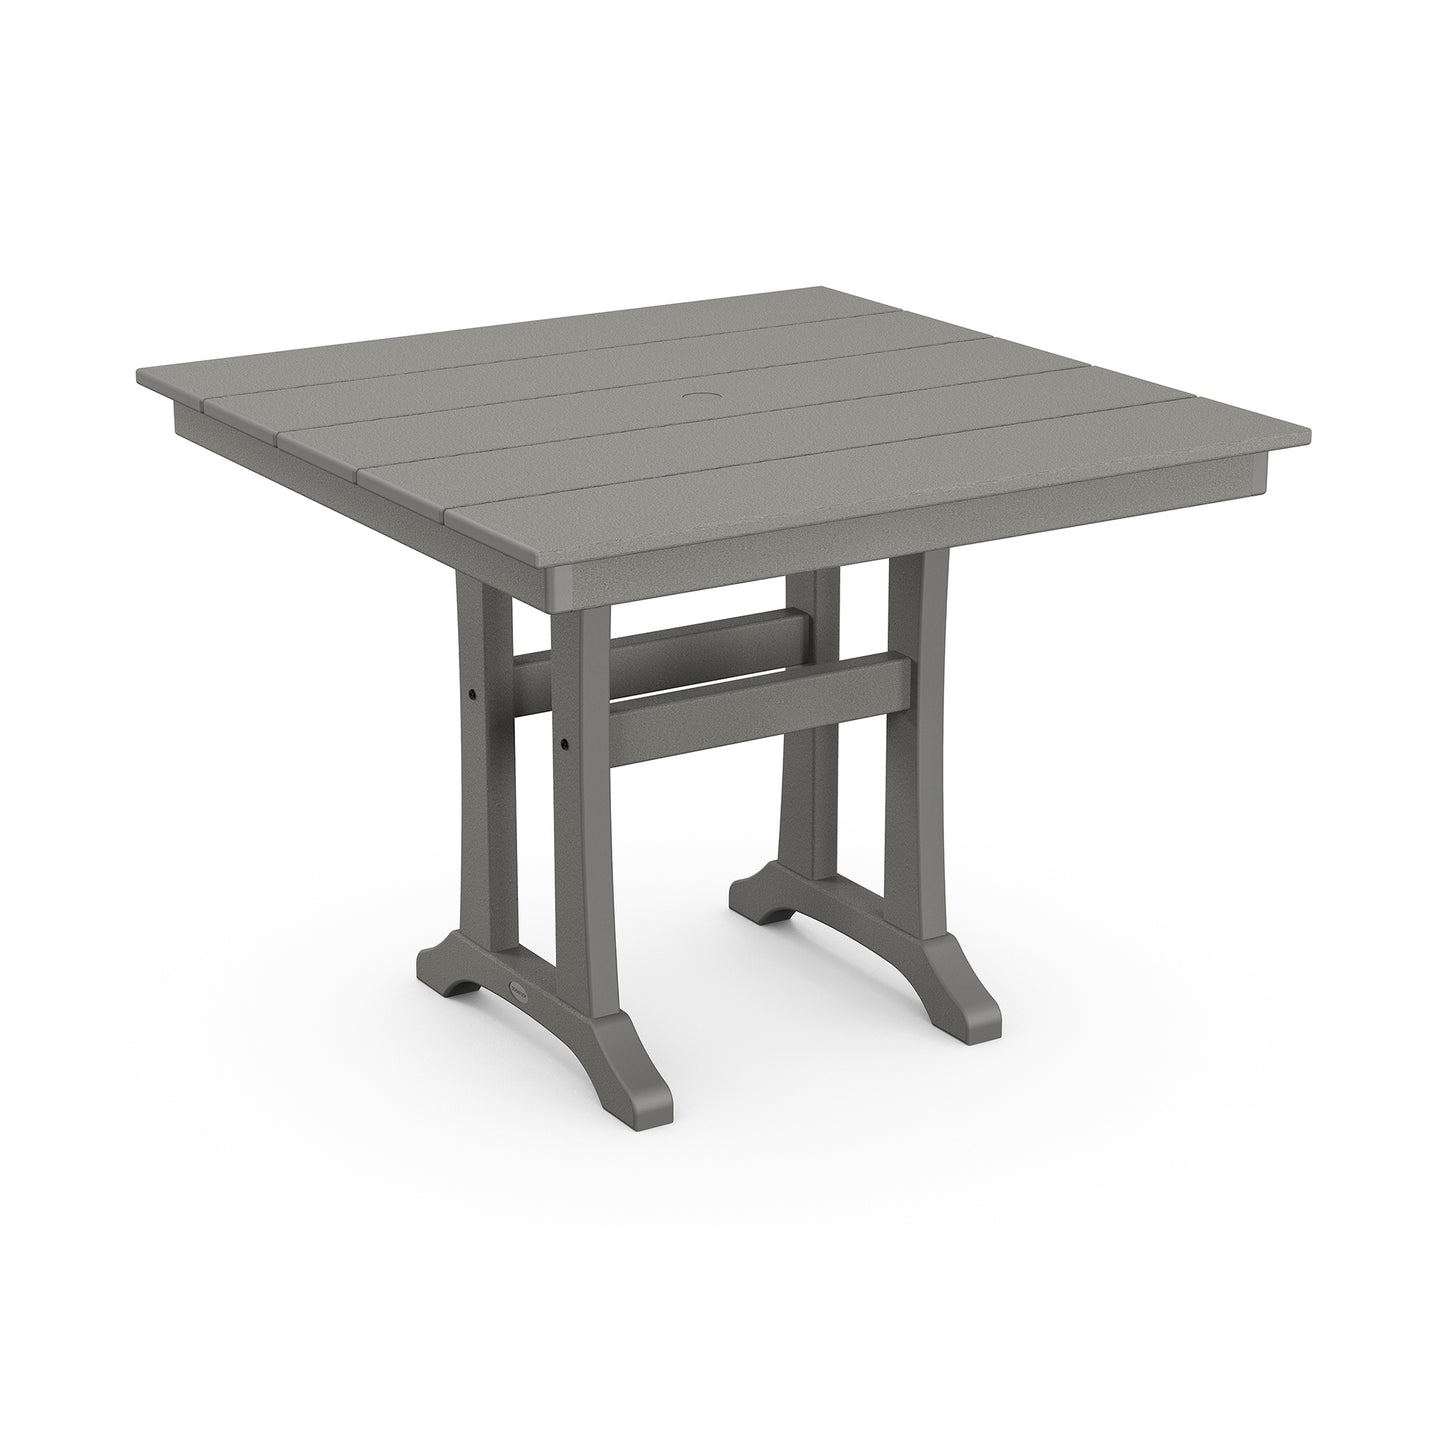 A 3D rendering of a POLYWOOD Farmhouse Trestle 37" Dining Table, featuring a flat top and sturdy, angled legs.